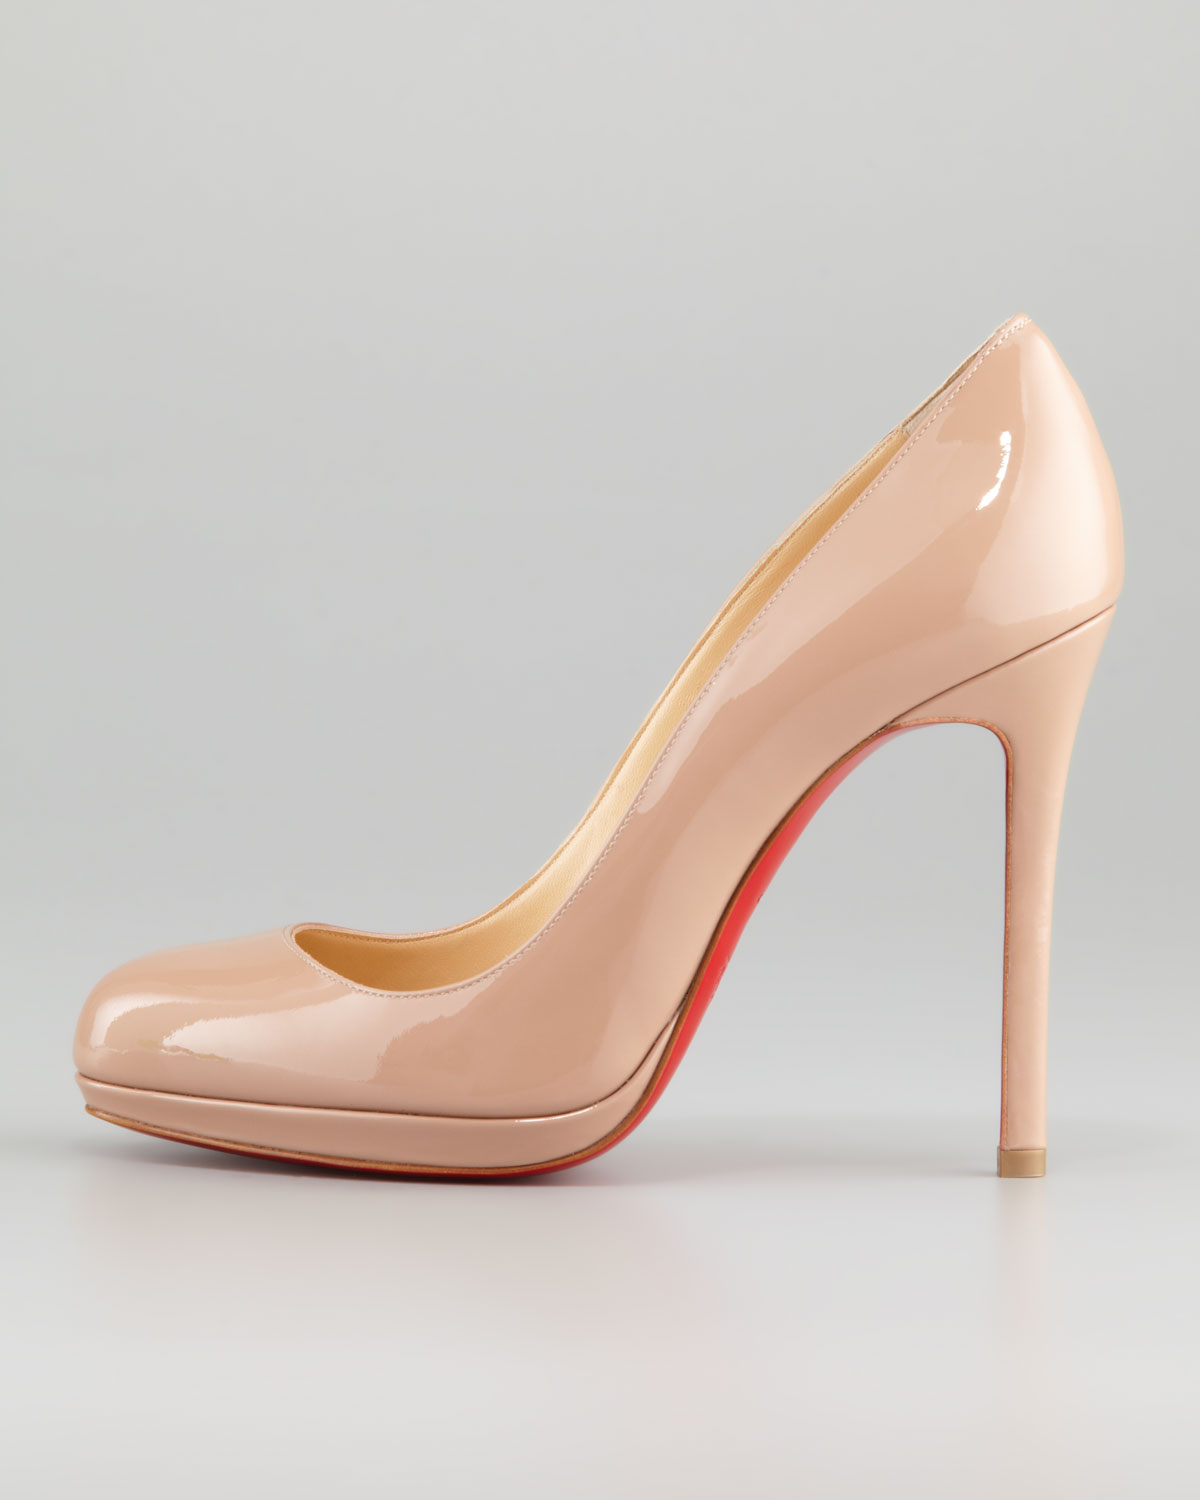 Christian Louboutin Nude Patent Leather Pumps Christian Louboutin Leopard Sneakers